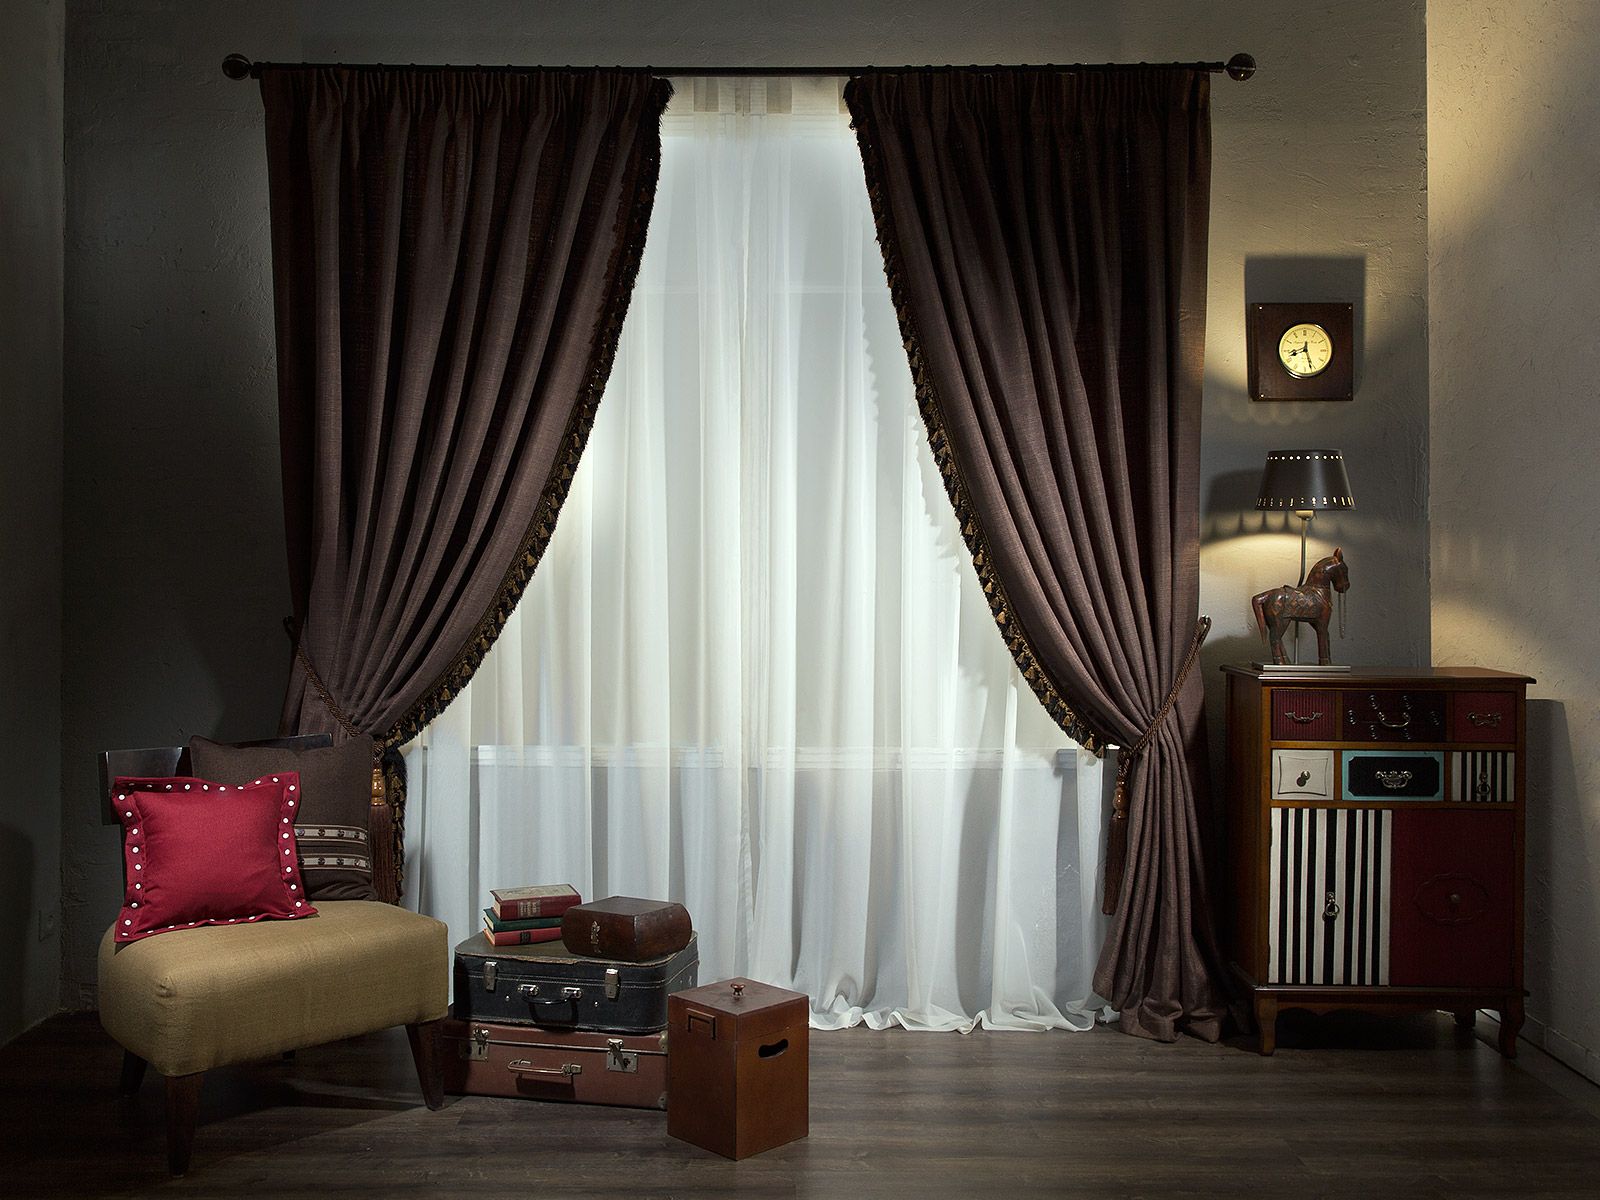 beautiful bedroom decor in chocolate color